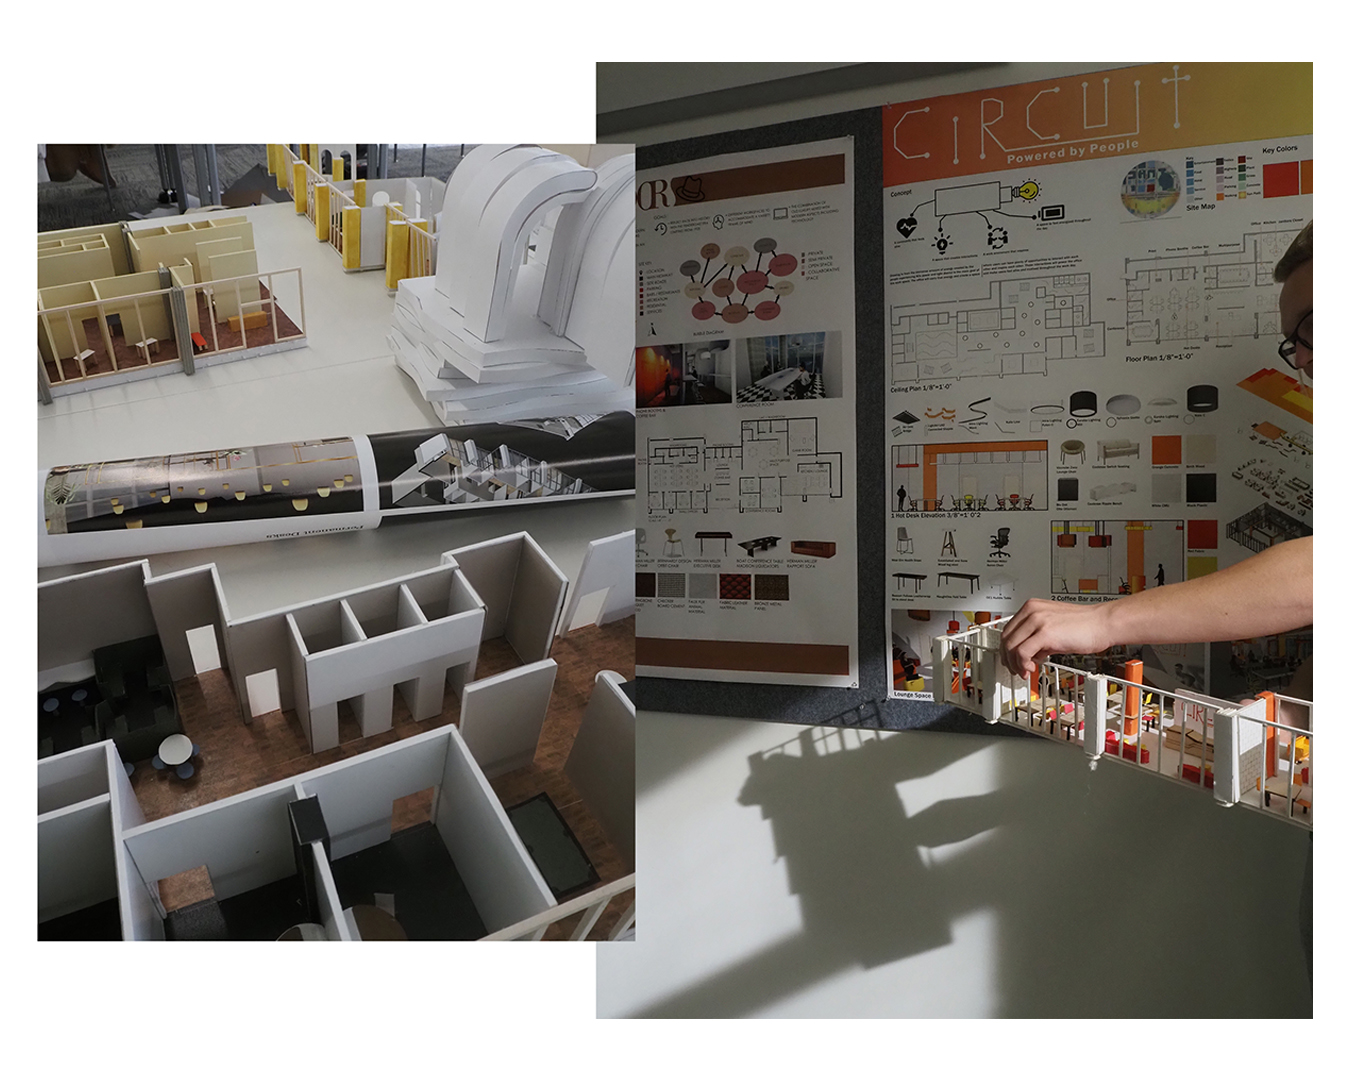 Two color photographs show details of design studio setting–architecture models and presentation boards on walls and tables.